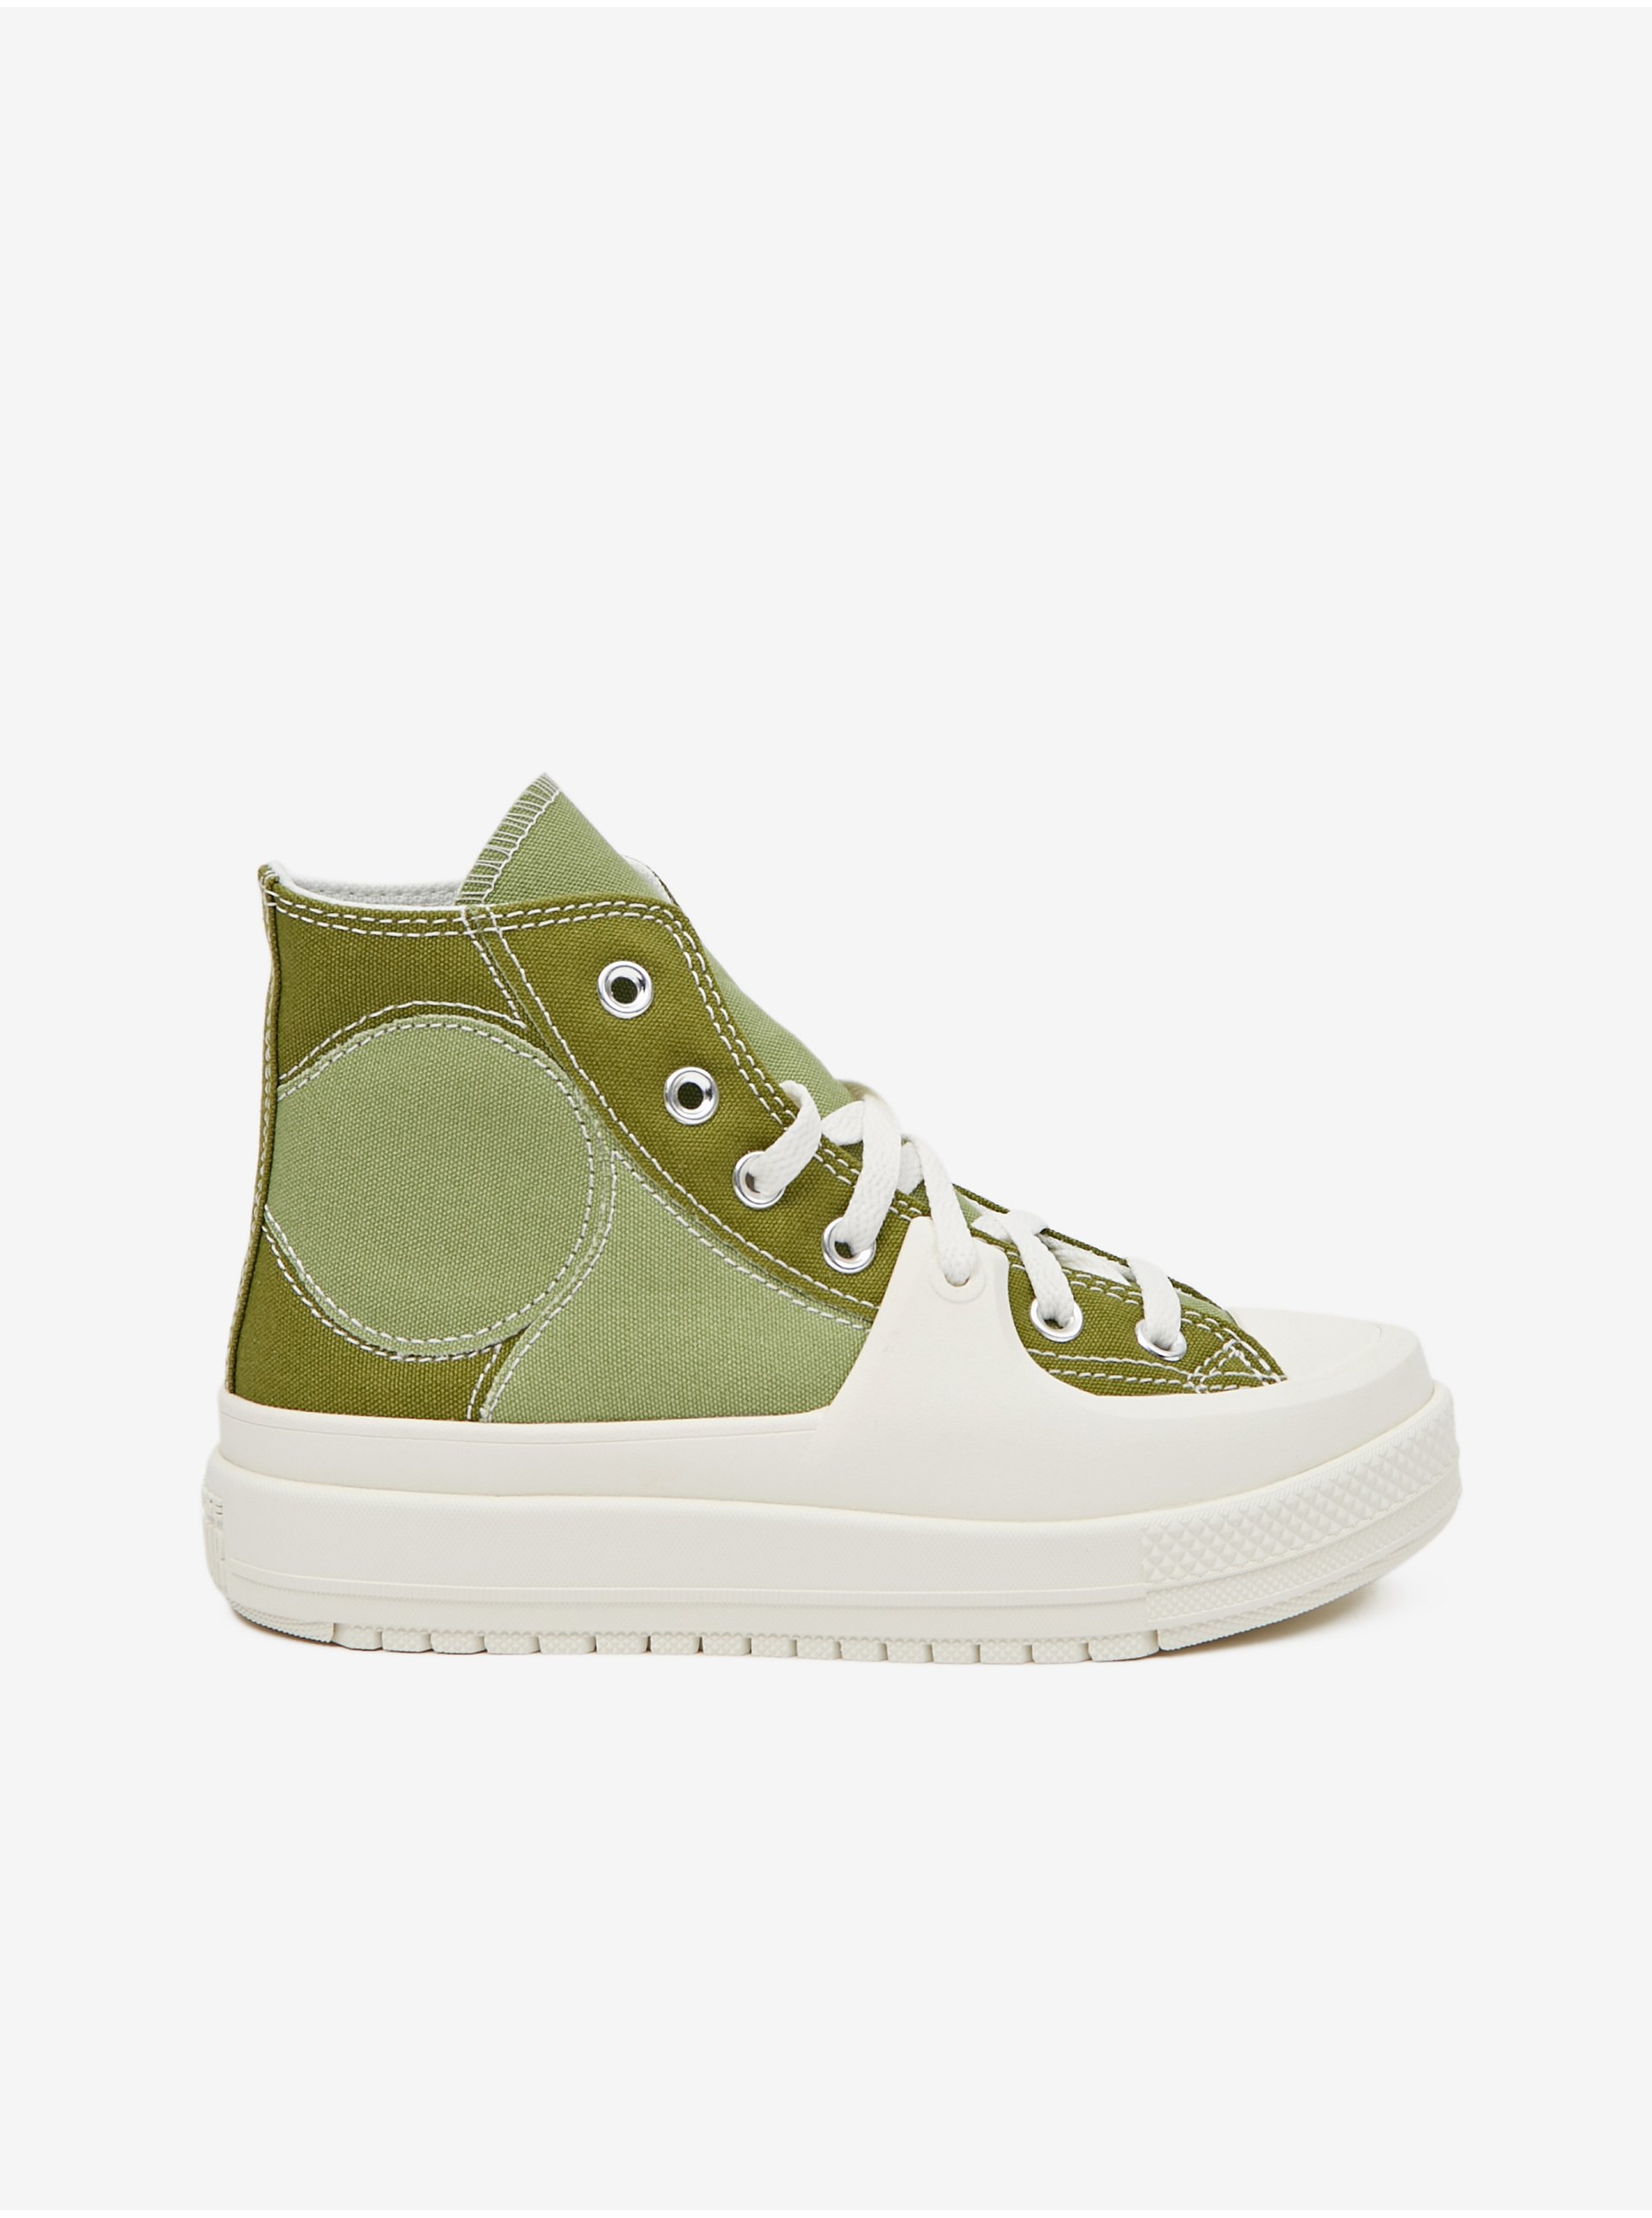 Green Ankle Sneakers Converse Chuck Taylor All Star Construct - Women